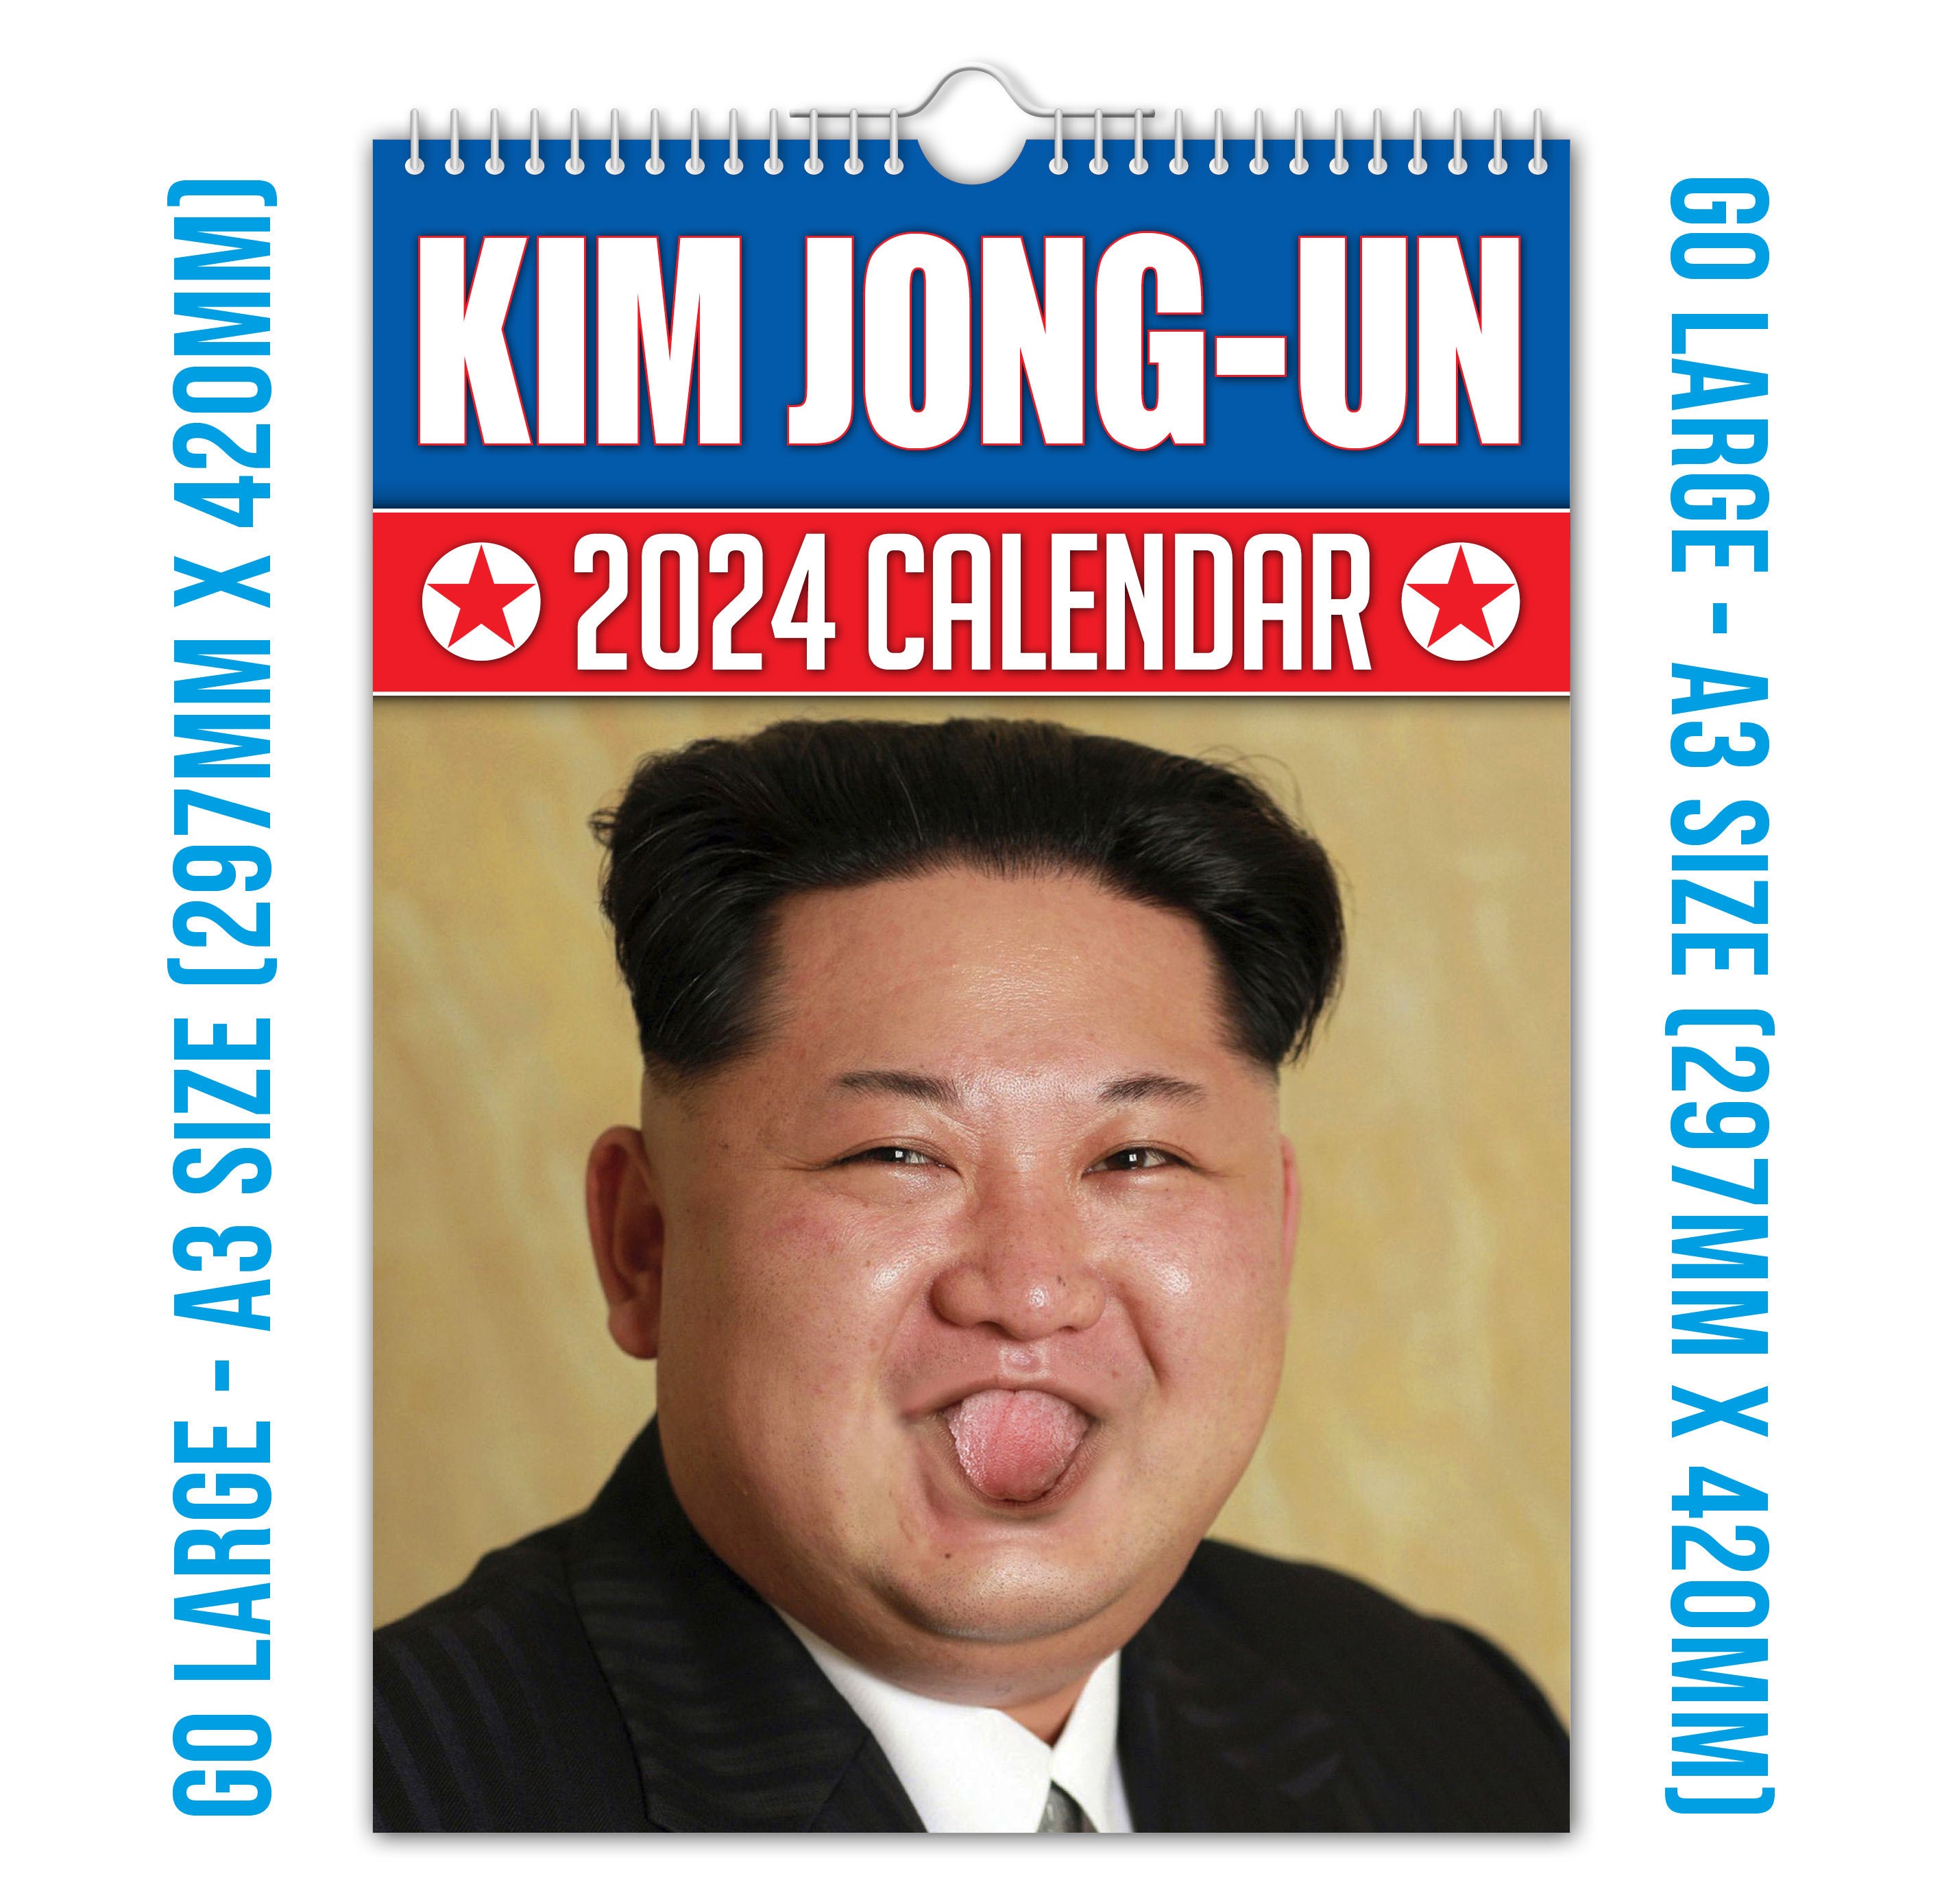 Pin by Kari on (un)funny things in 2023